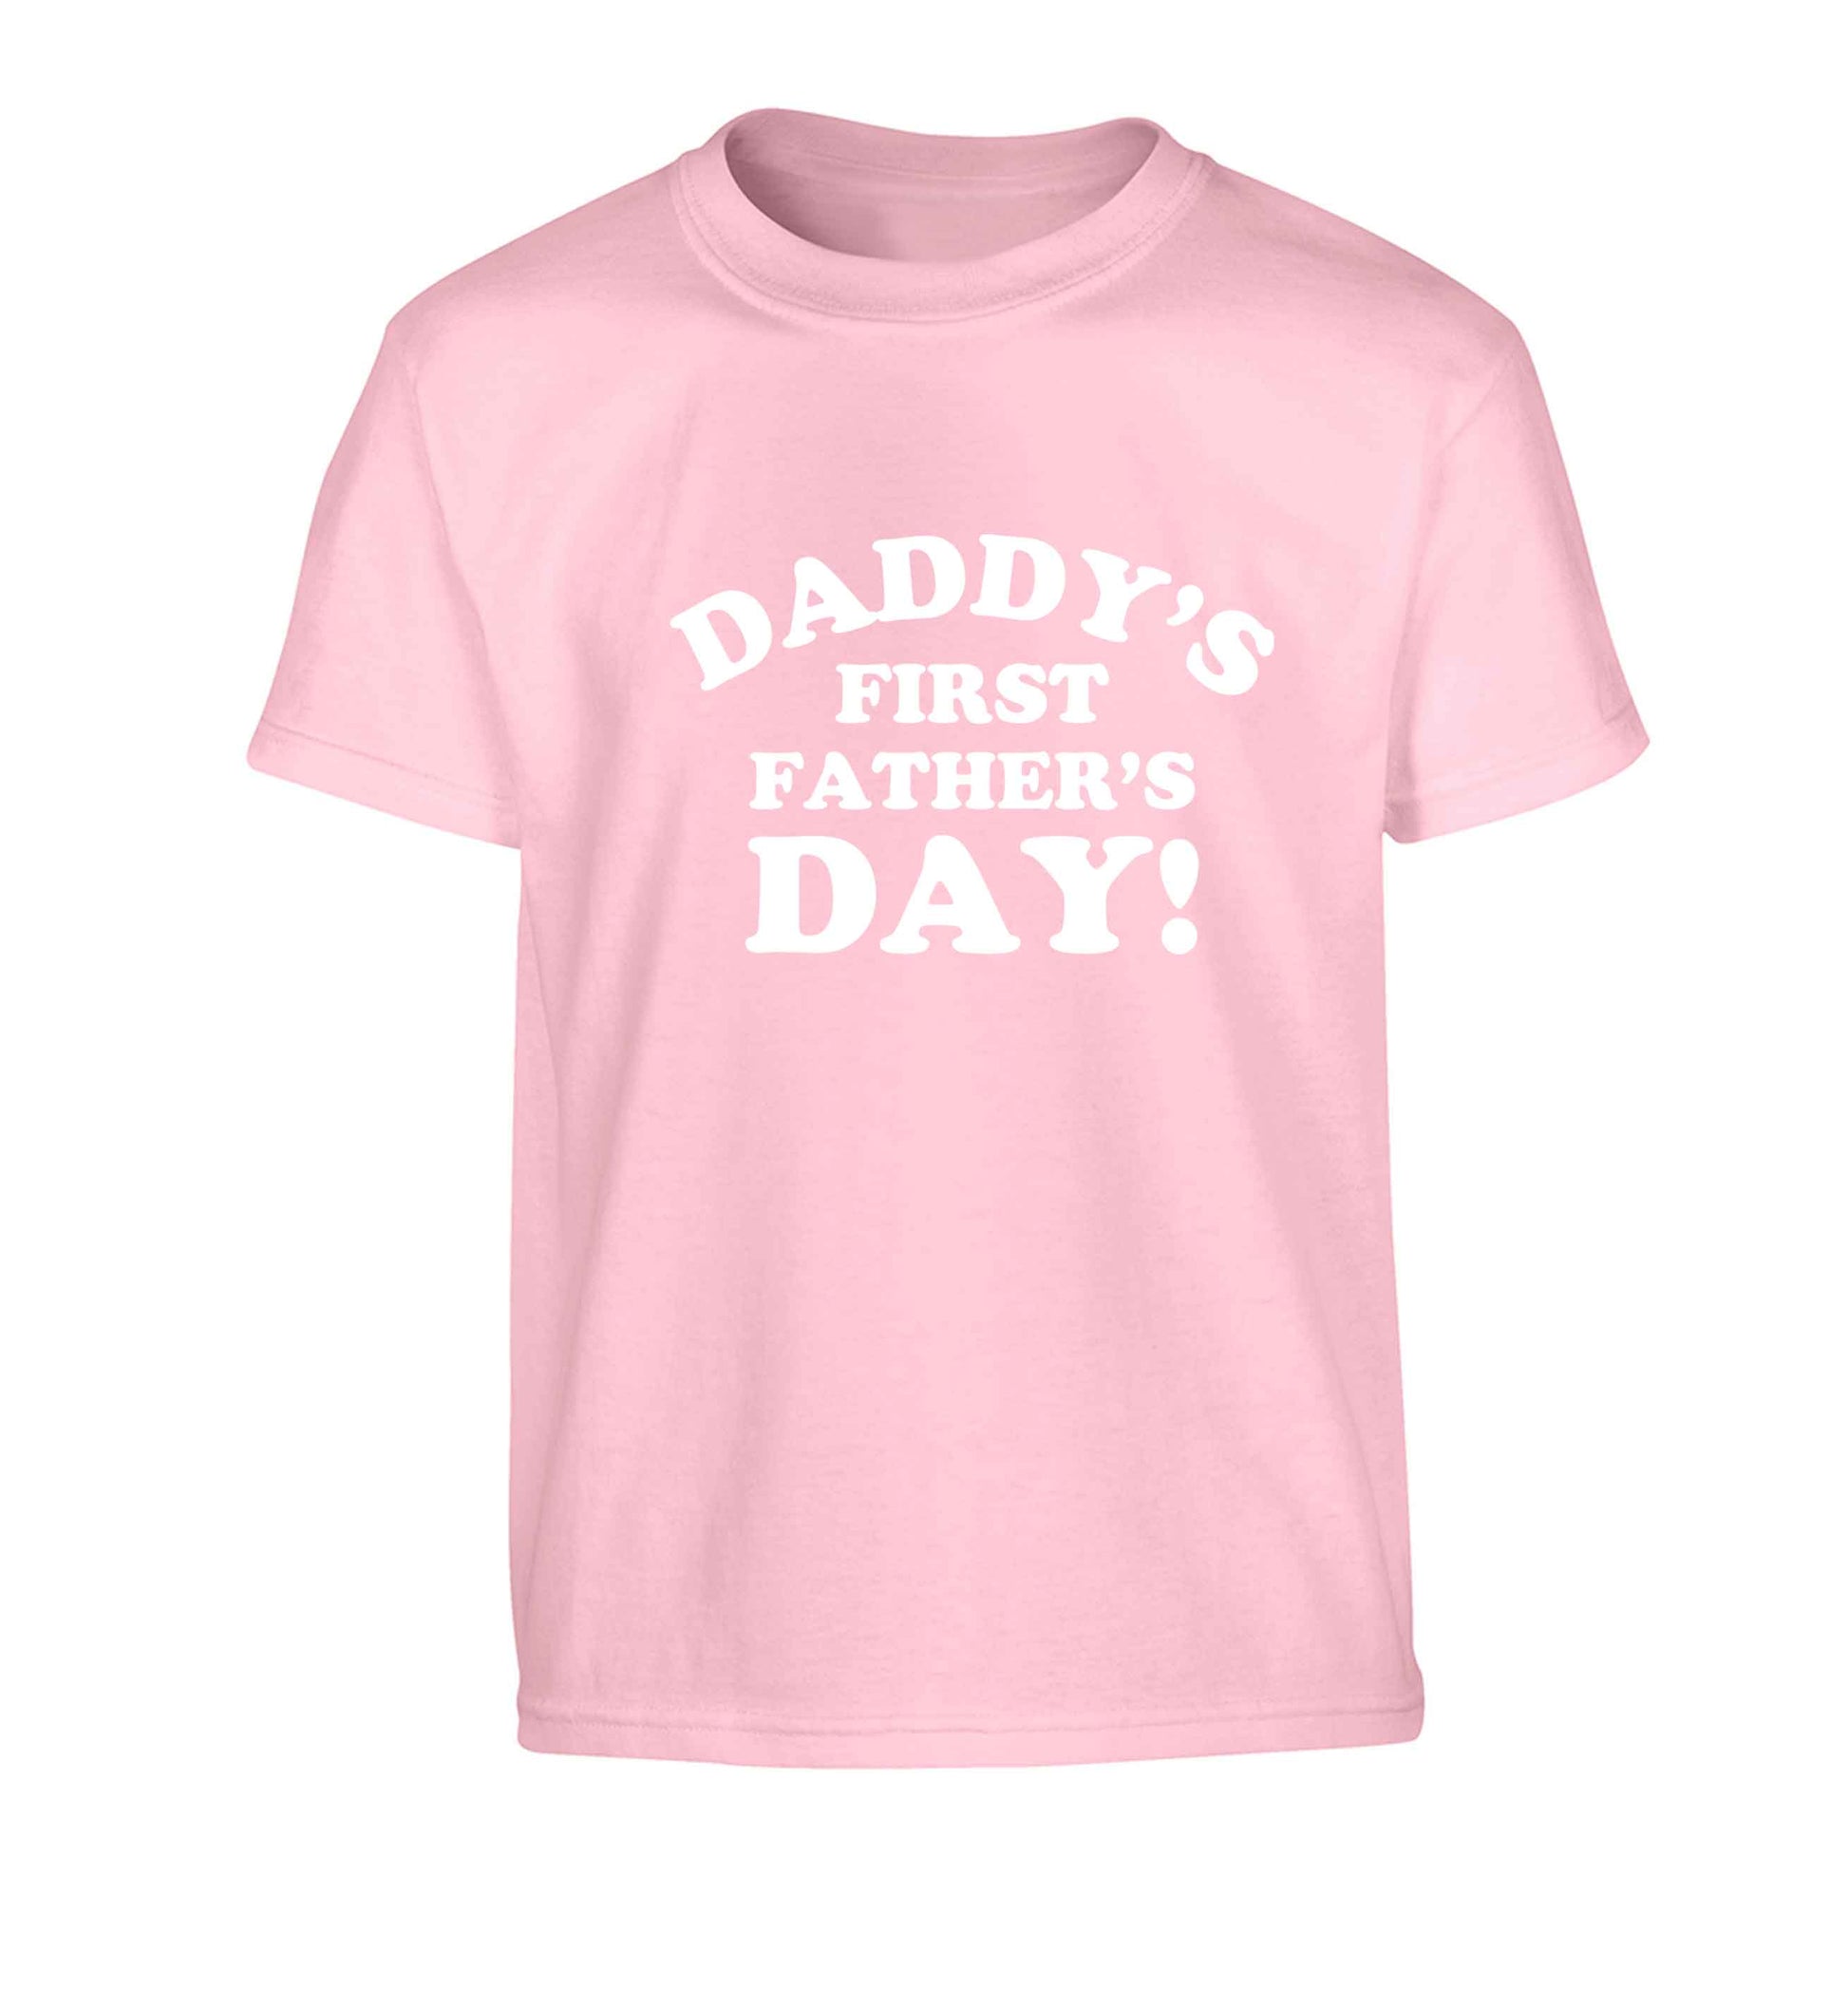 Daddy's first father's day Children's light pink Tshirt 12-13 Years